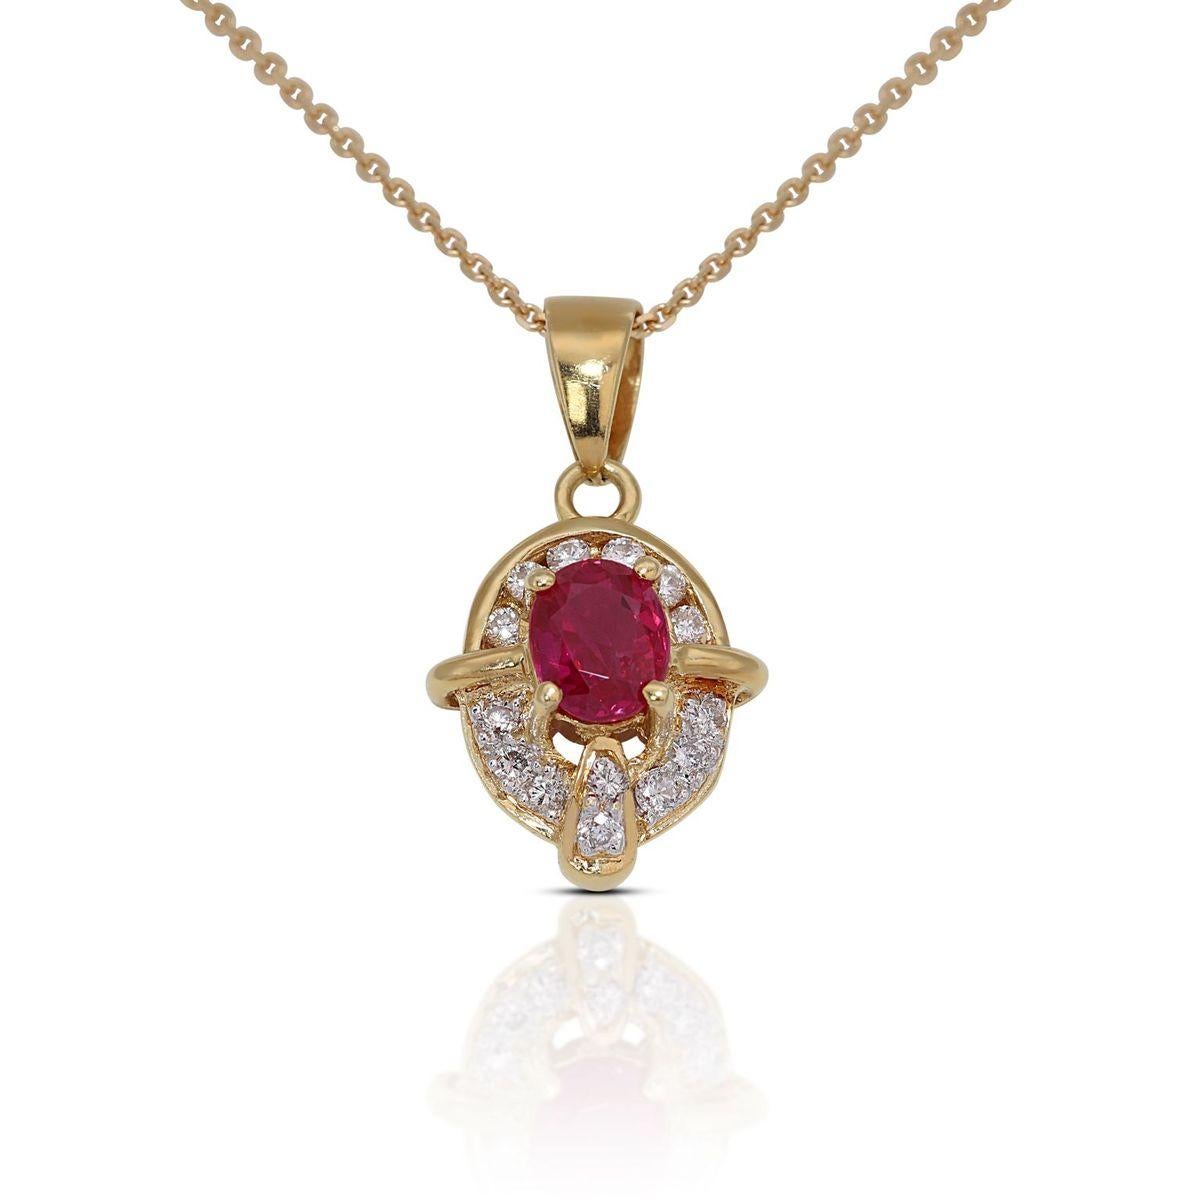 The design of the pendant is both graceful and versatile, making it a perfect accessory for various occasions. The gold setting is crafted with precision, featuring delicate details that add a touch of sophistication to the overall design. The